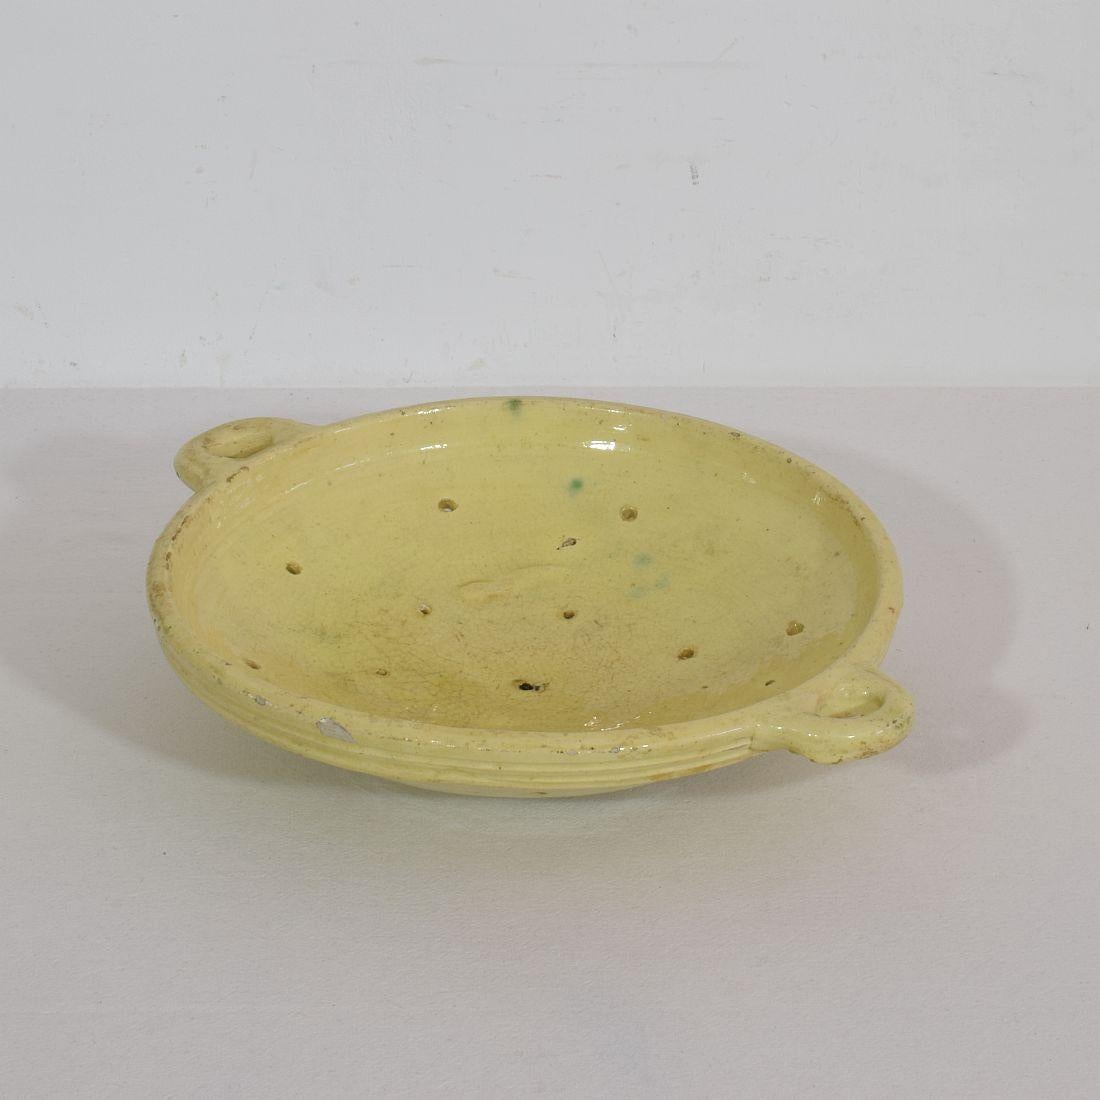 Wonderful earthenware strainer with a stunning glaze. France circa 1880-1900. Good condition.